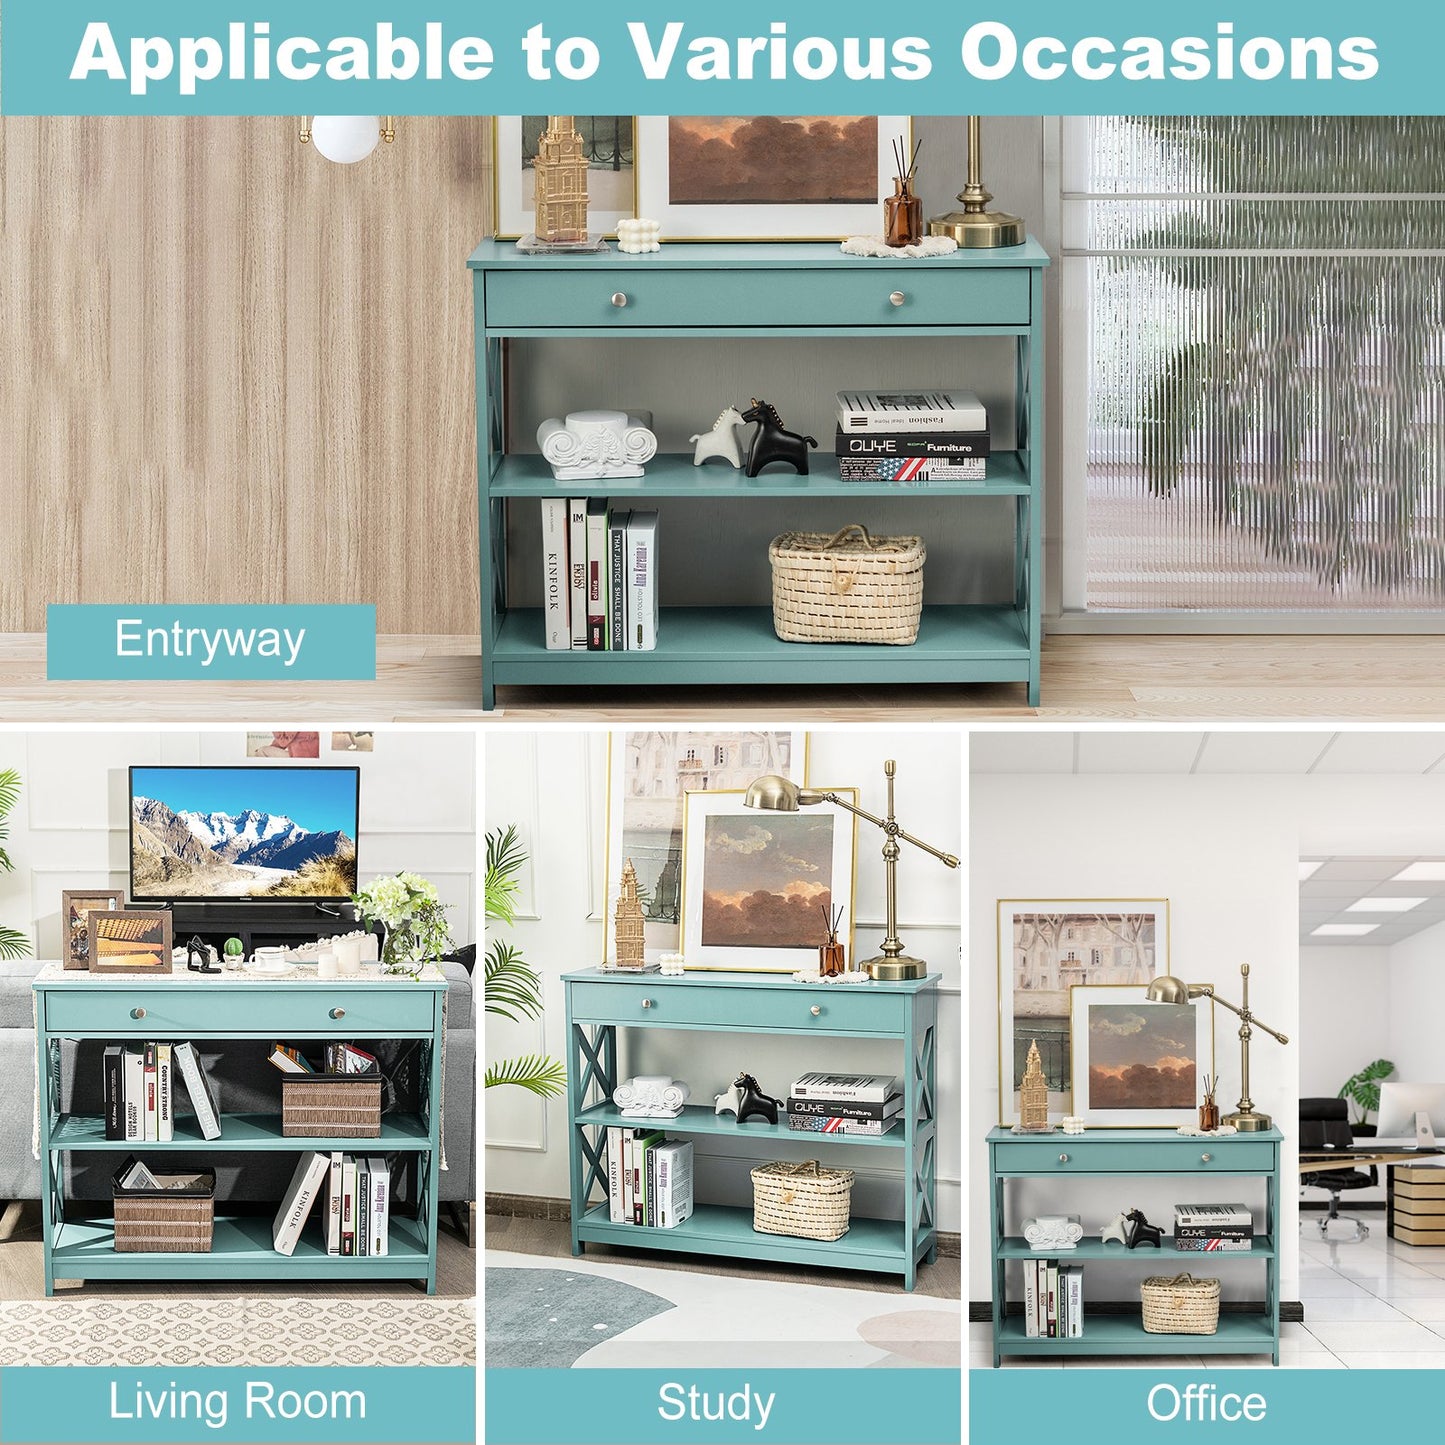 Console Table 3-Tier with Drawer and Storage Shelves, Turquoise at Gallery Canada